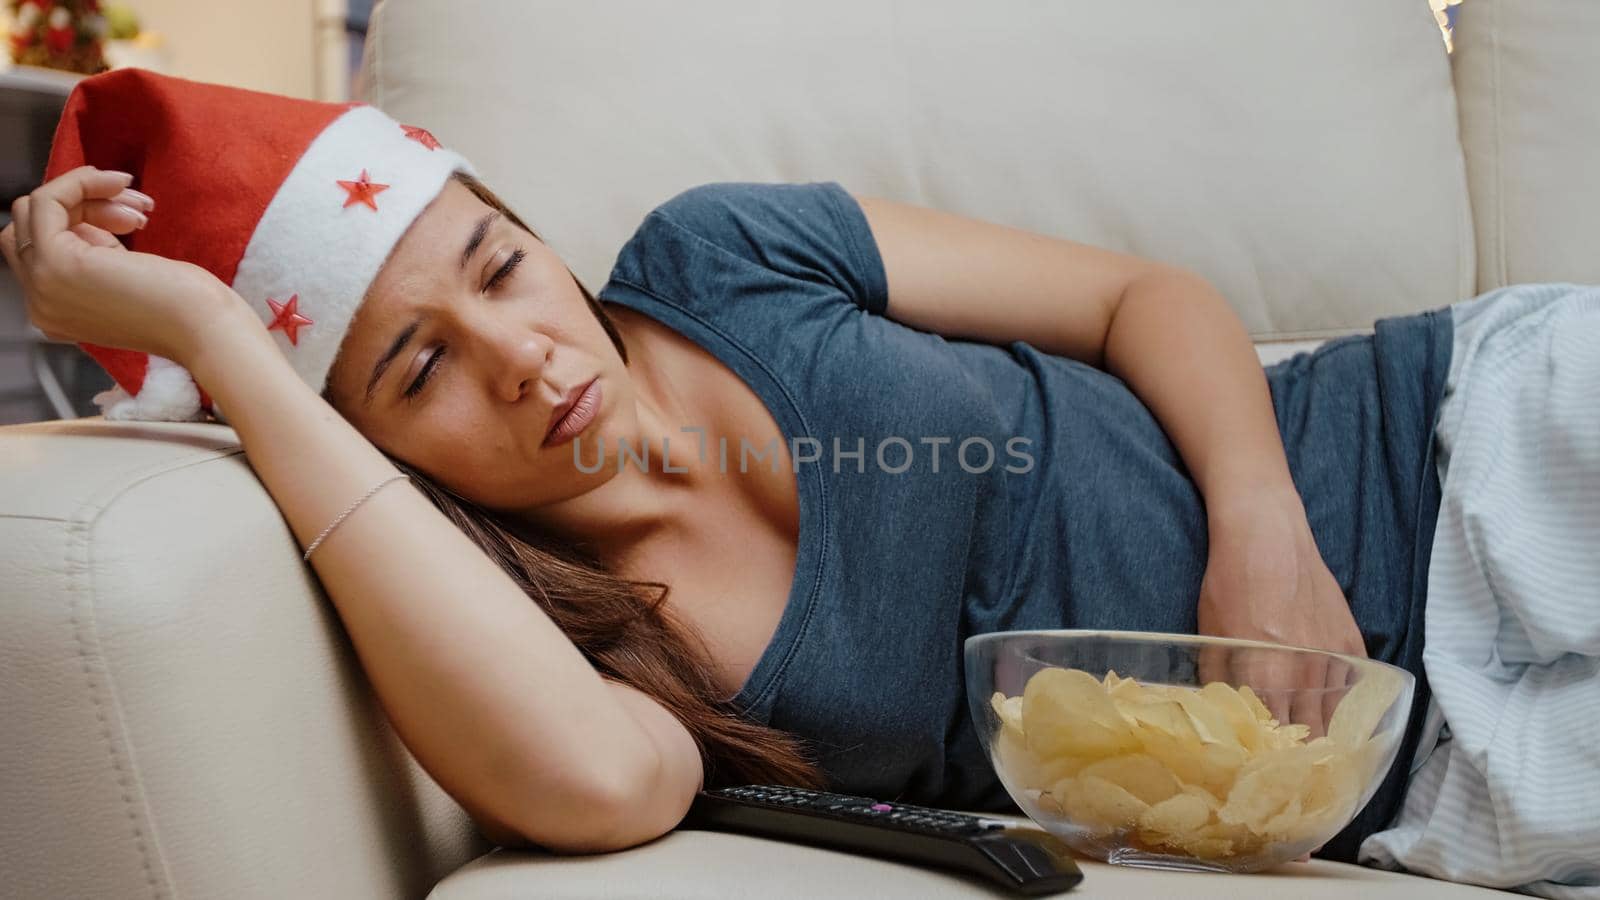 Sleepy person wearing santa hat and sitting at TV with chips on christmas eve. Festive woman falling asleep while watching movie on television, laying on couch with remote control and snack